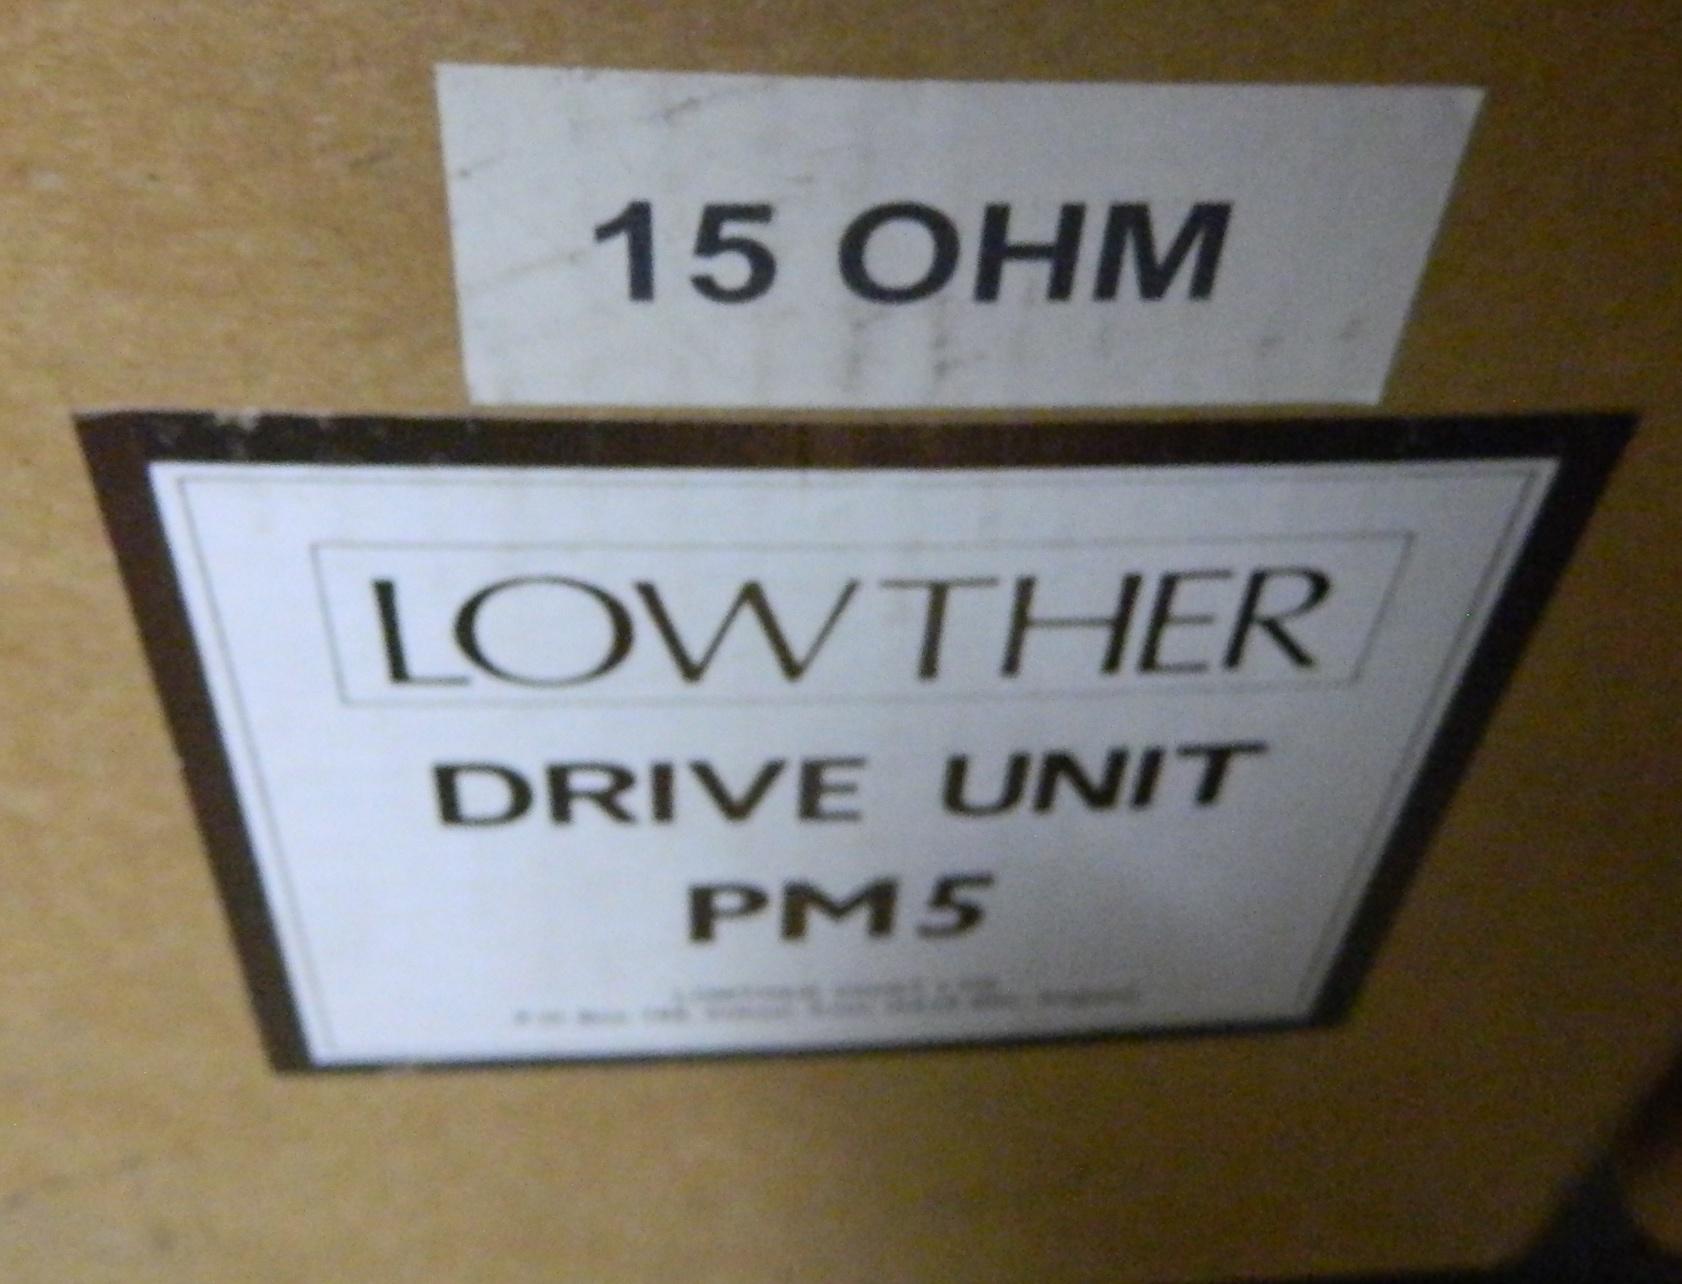 Lowther Drive Unit